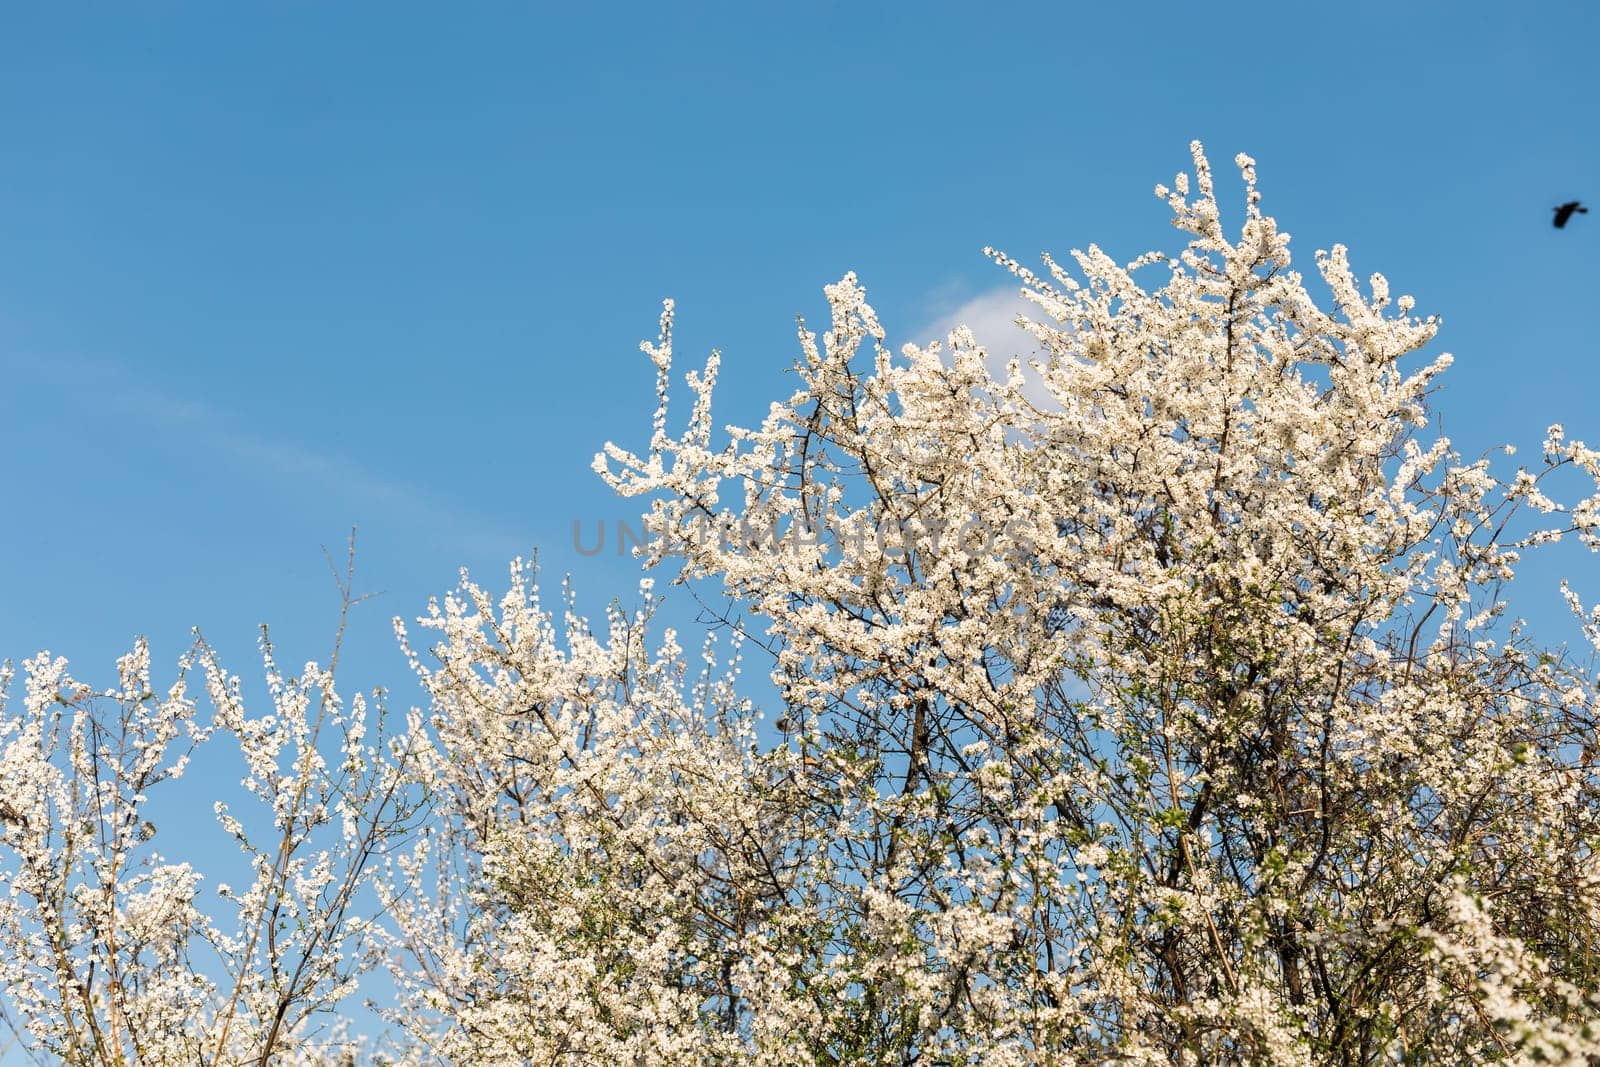 Cherry or apple tree blossoms over blurred nature background. Spring flowers and blue sky. by Satura86